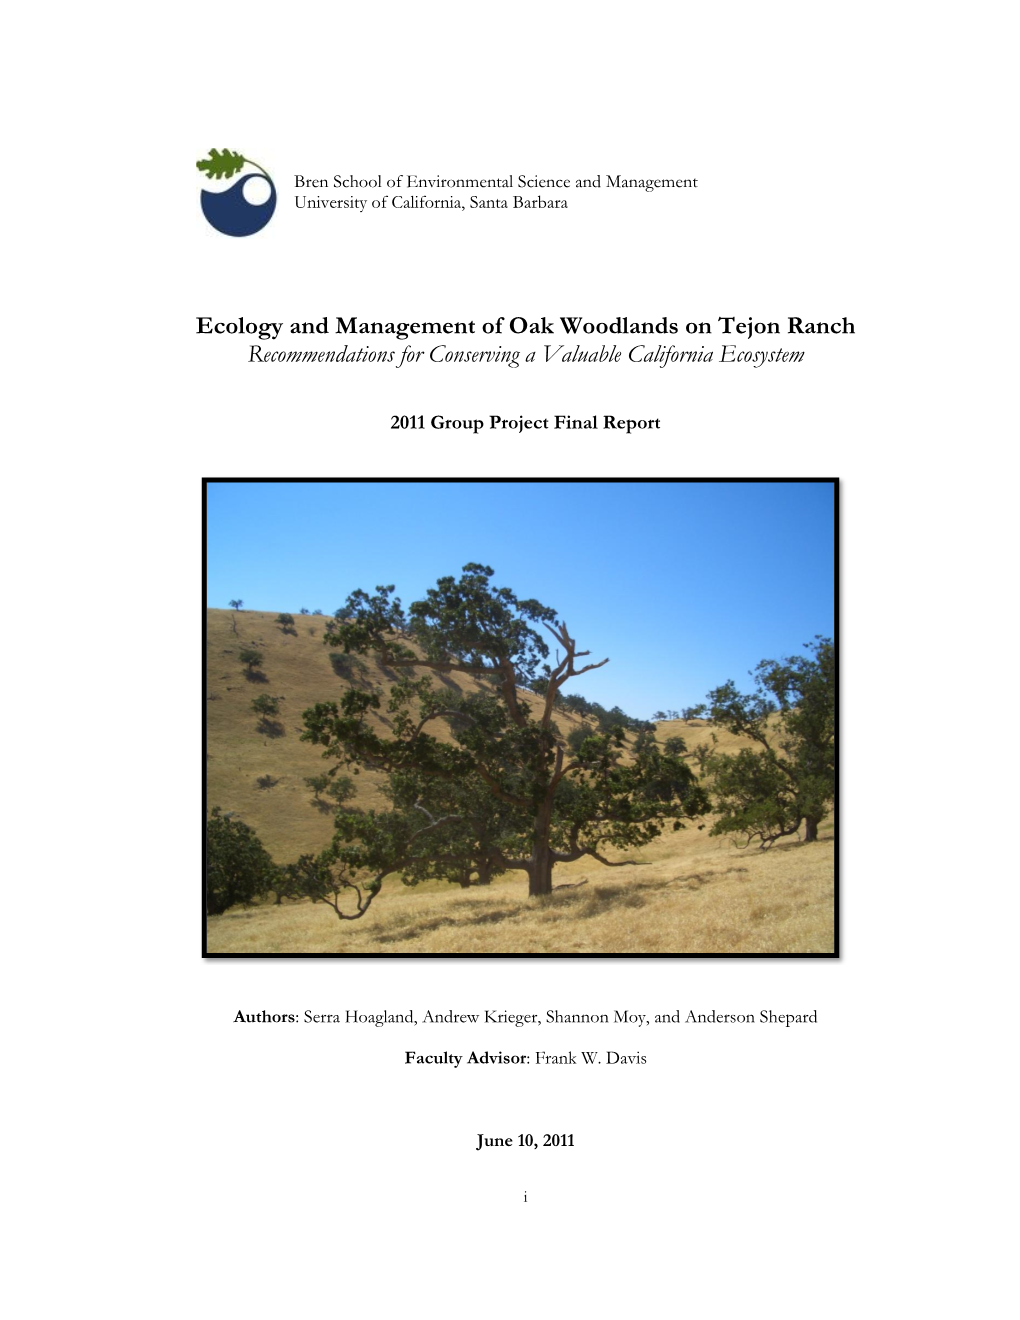 Ecology and Management of Oak Woodlands on Tejon Ranch Recommendations for Conserving a Valuable California Ecosystem